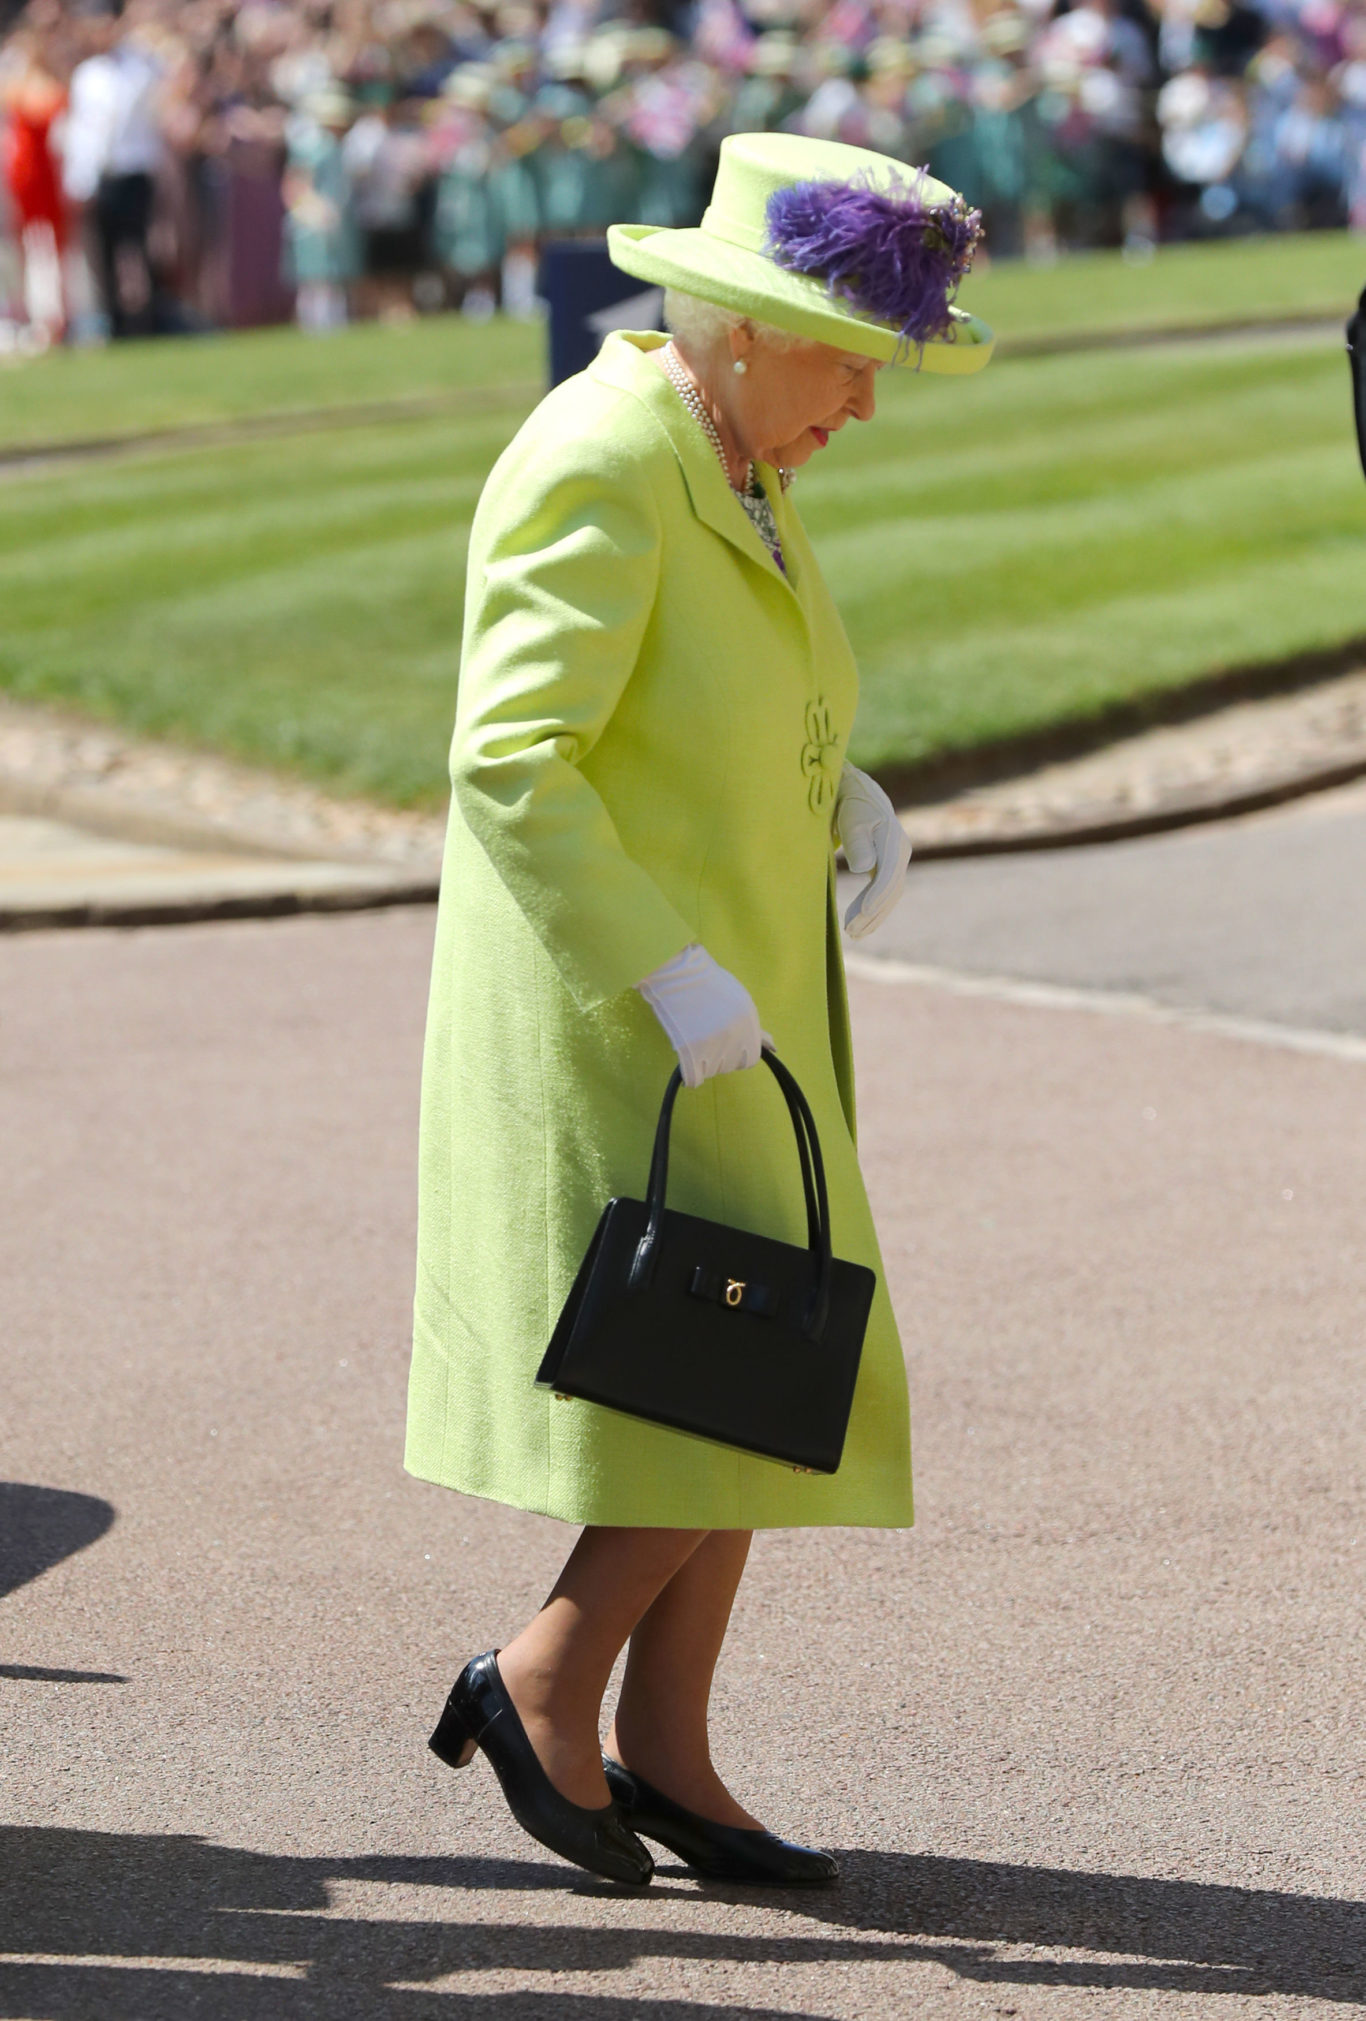 Next came the Queen in a bright green outfit (Gareth Fuller/PA)